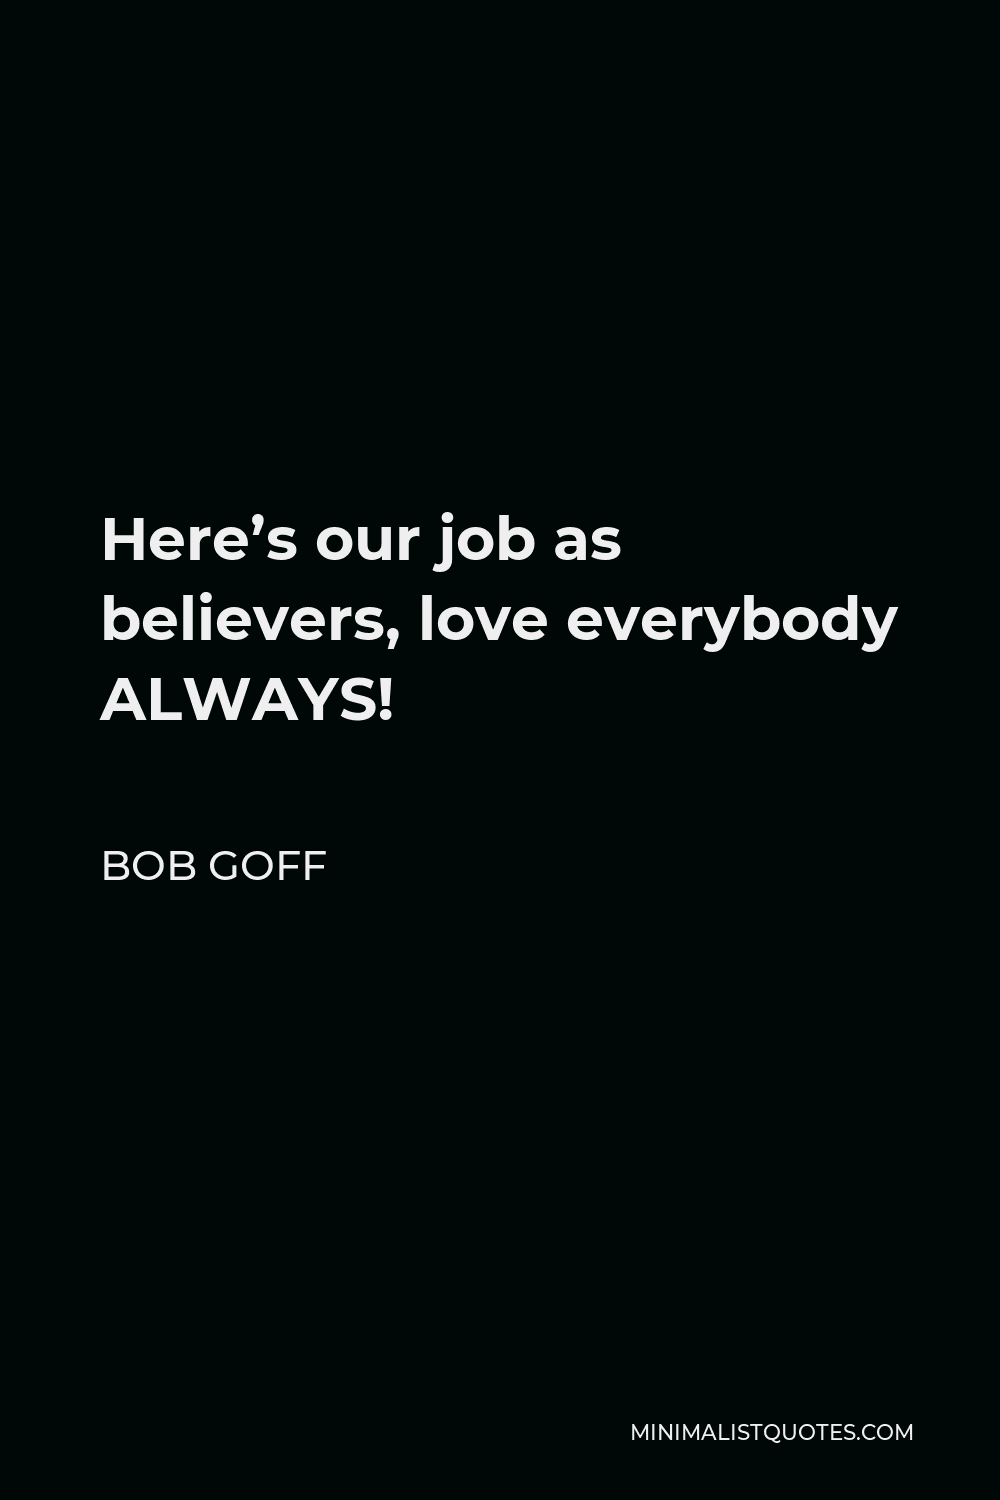 Bob Goff Quote - Here’s our job as believers, love everybody ALWAYS!